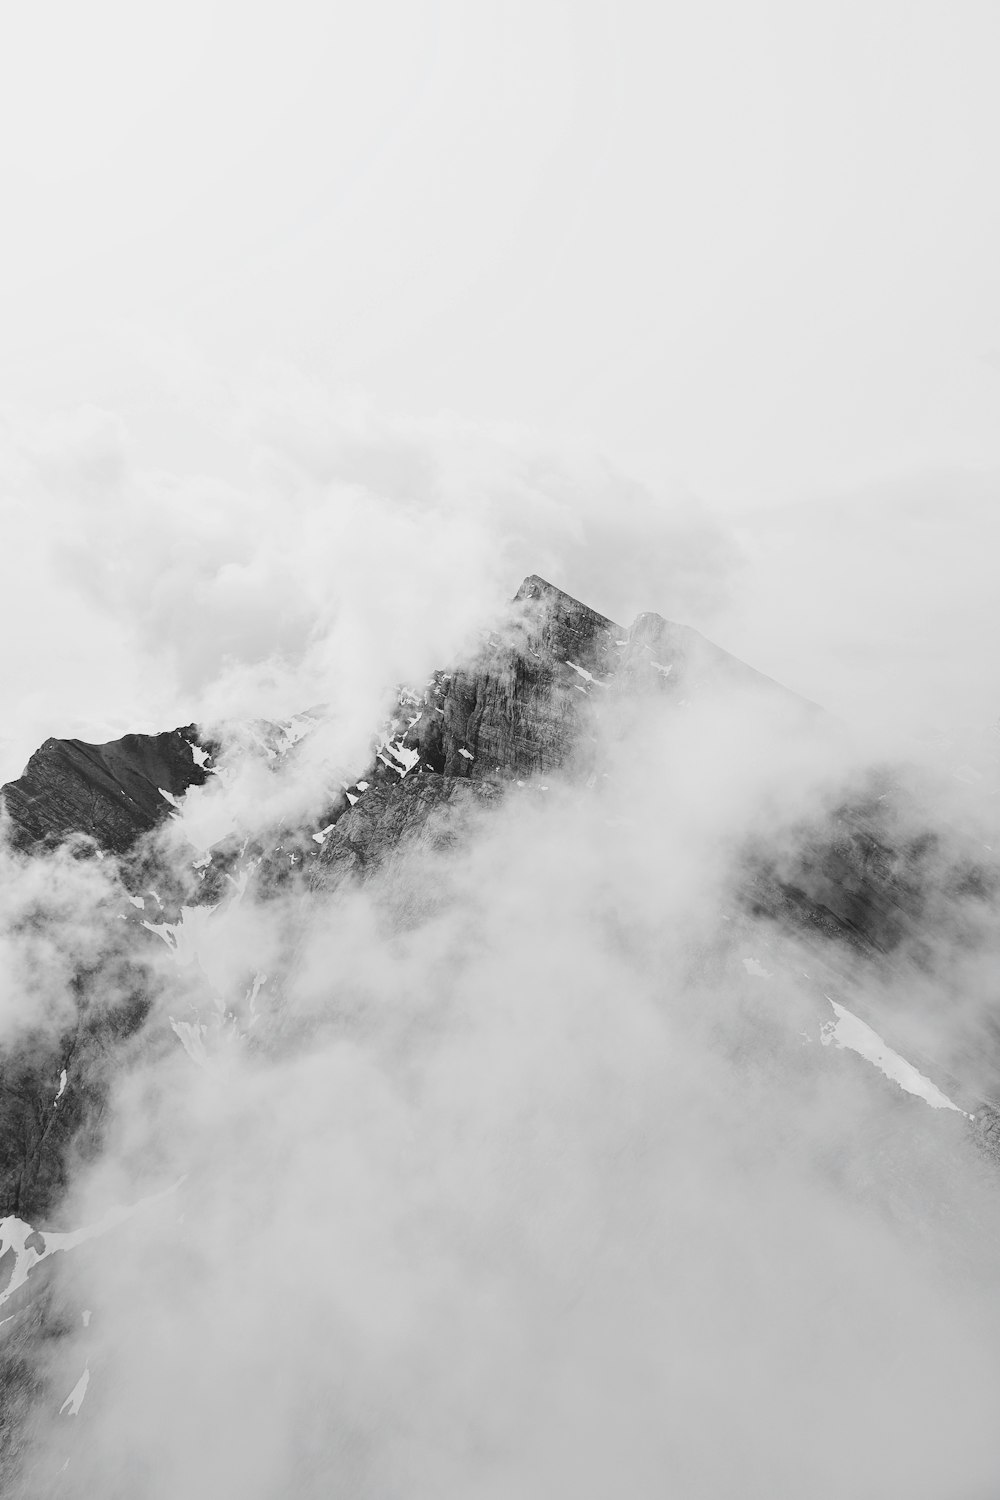 grayscale photo of mountain covered by clouds